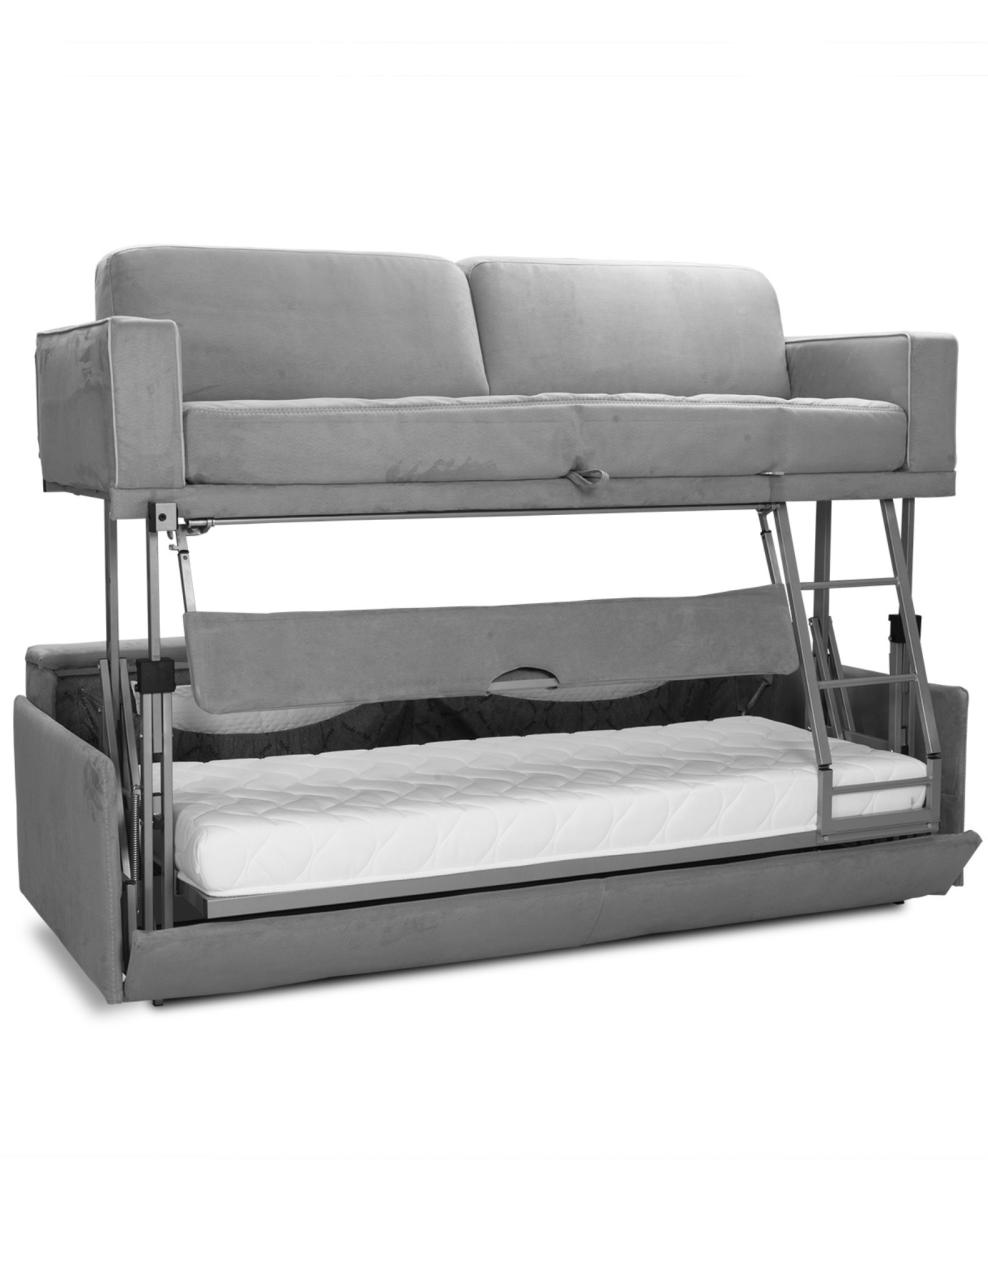 The Dormire V2 - Bunk Bed Couch Transformer - Expand Furniture - Folding  Tables, Smarter Wall Beds, Space Savers